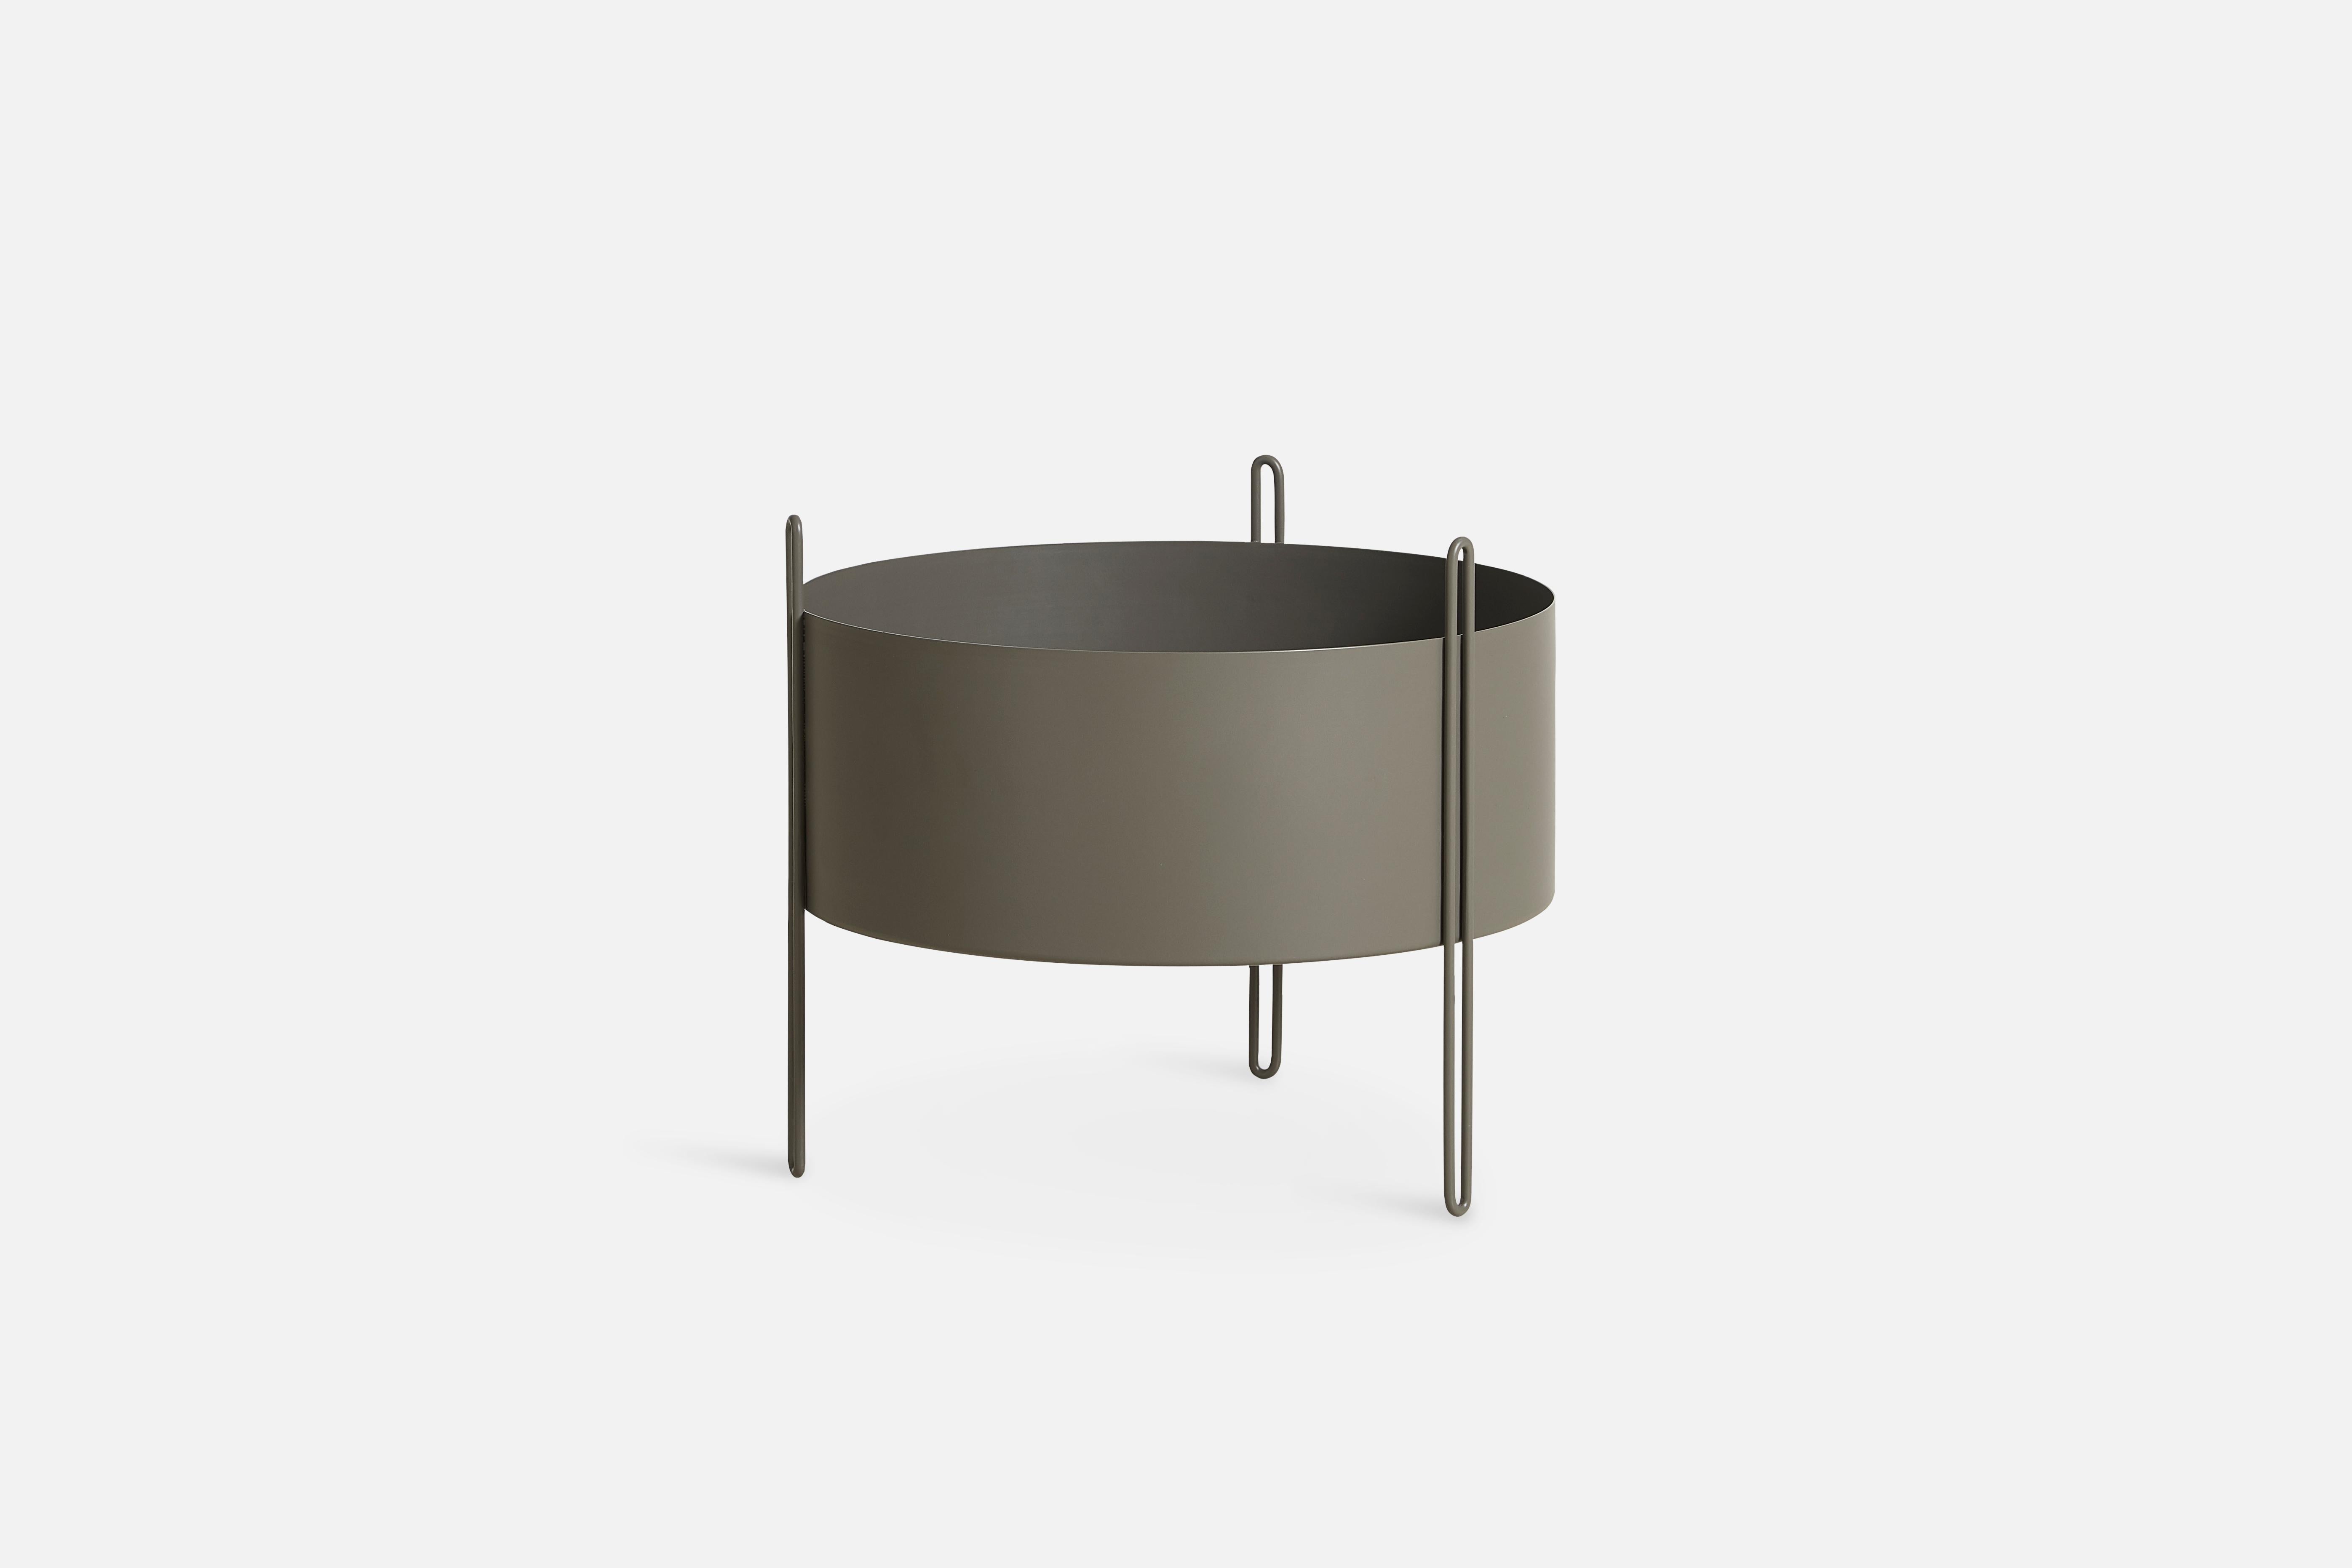 Medium taupe pidestall planter by Emilie Stahl Carlsen.
Materials: metal.
Dimensions: D 40 x H 35 cm.
Available in grey, taupe or black and in 3 sizes: D 15 x H 15, D 40 x H 35, D 40 x H 55 cm.

Emilie Stahl Carlsen is a Nor wegian designer who